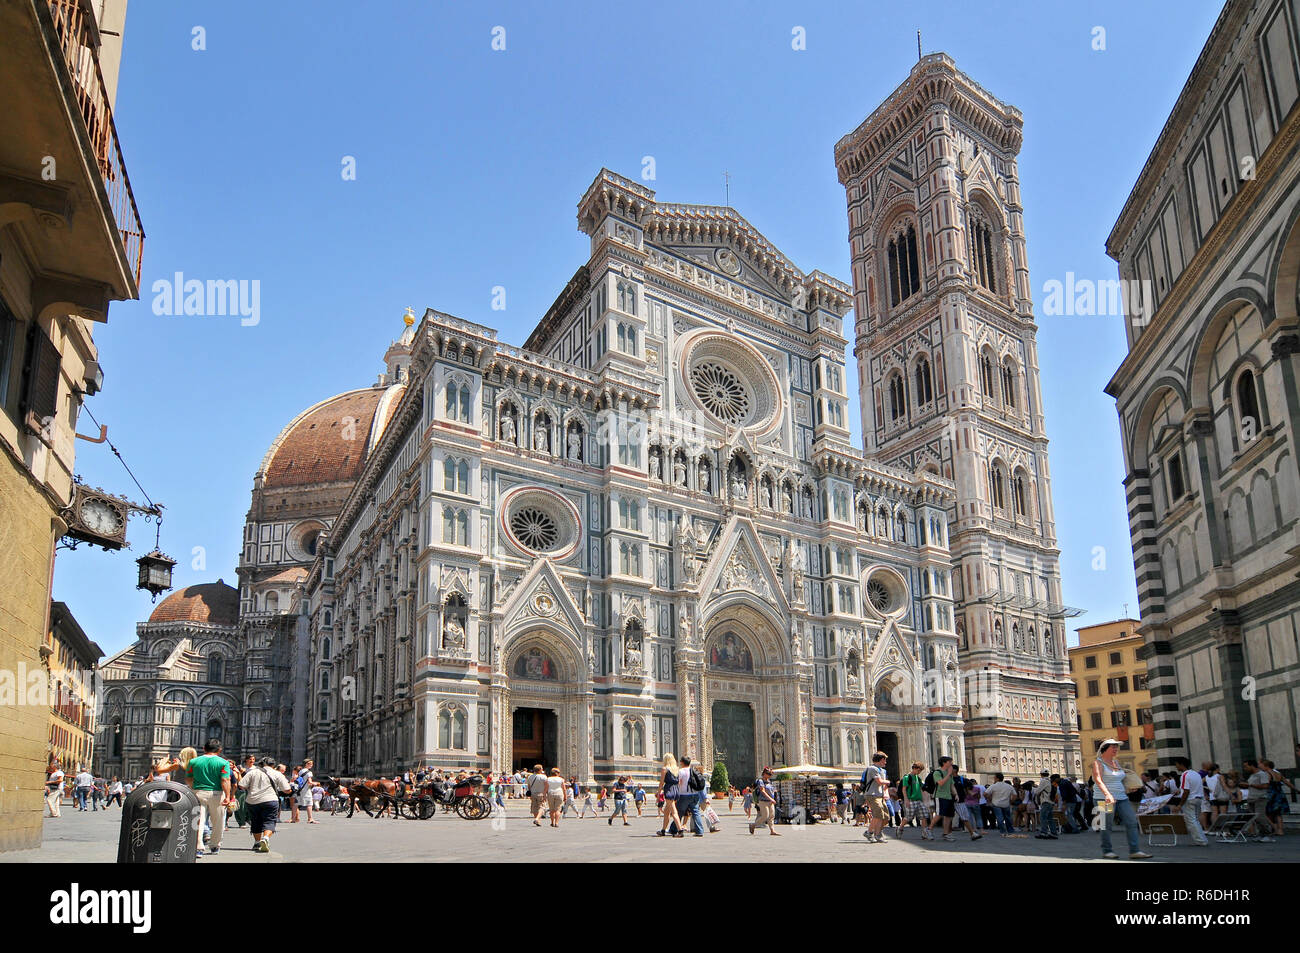 Florence, Italy Cathedral Of Santa Maria Del Fiore (1436), Or The Duomo, Seen From The Piazza San Giovanni Stock Photo